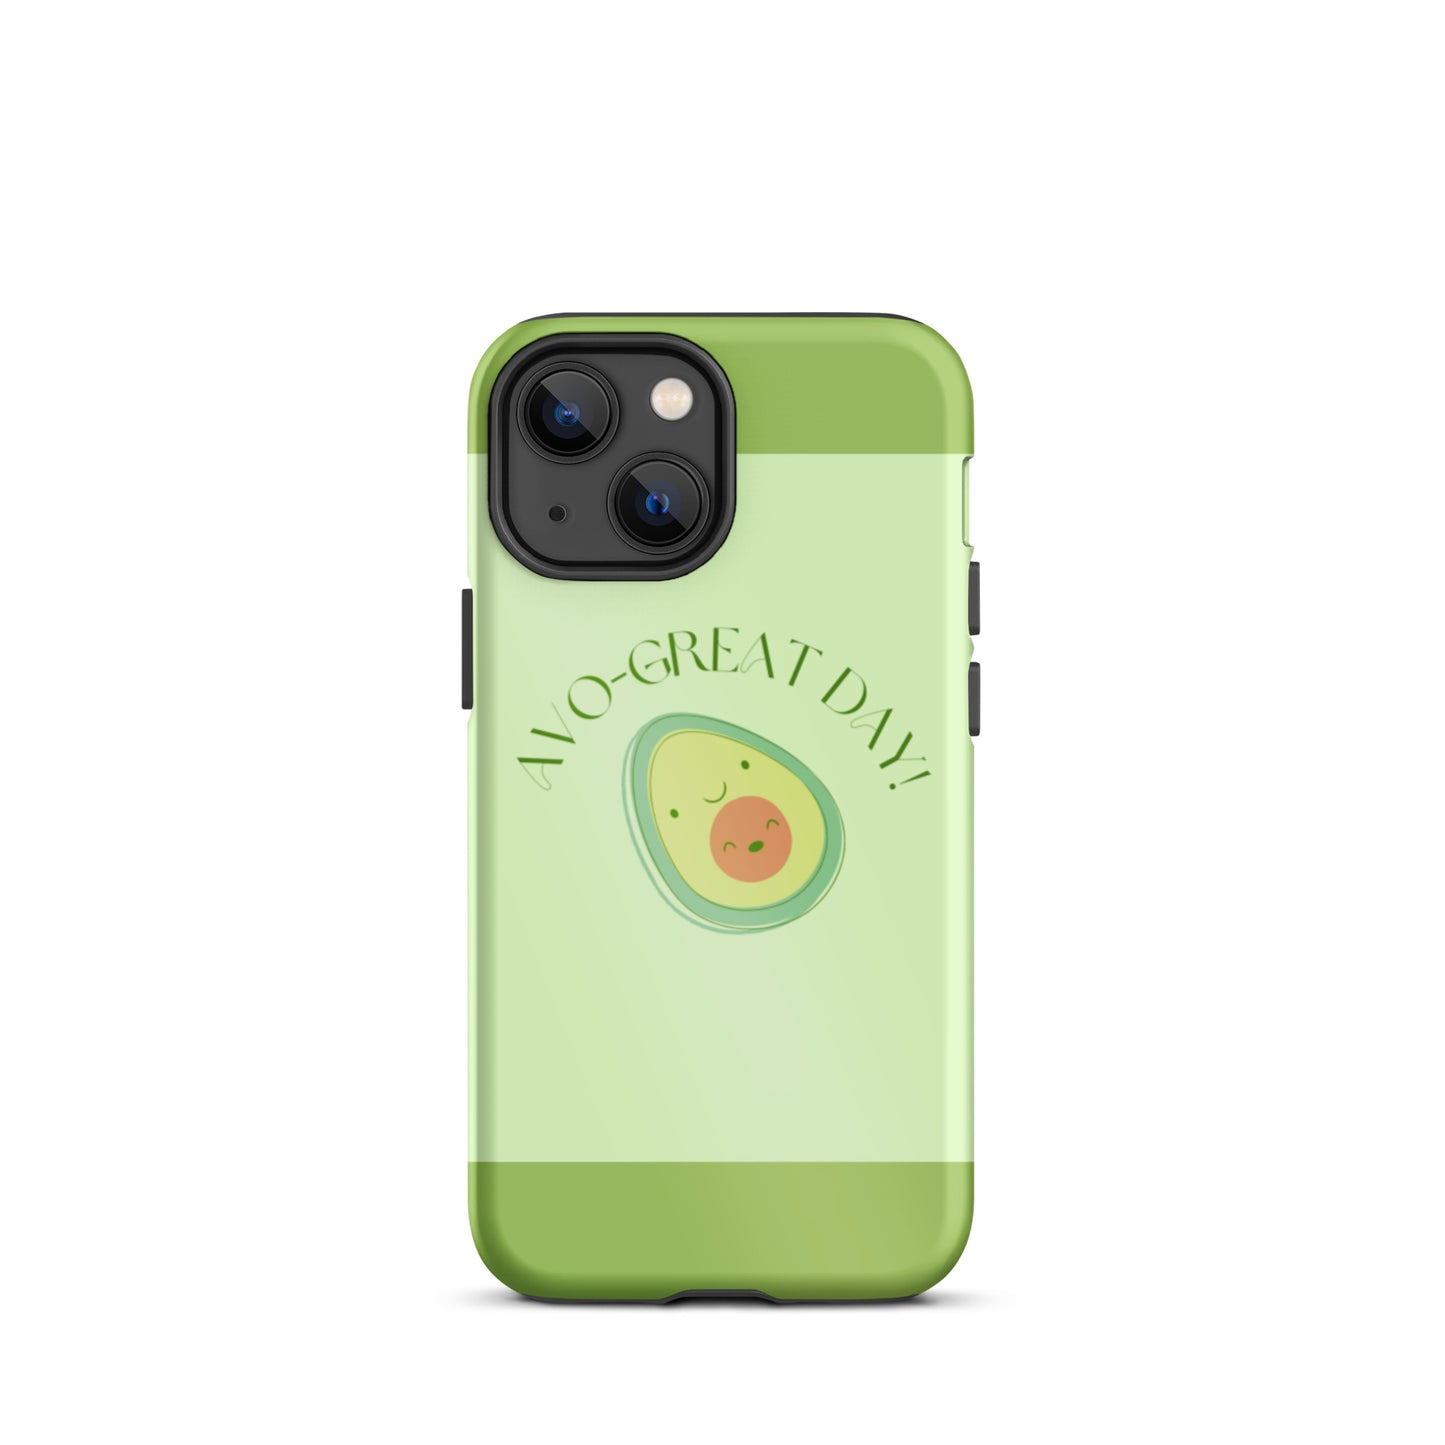 Avo-great Day iPhone case